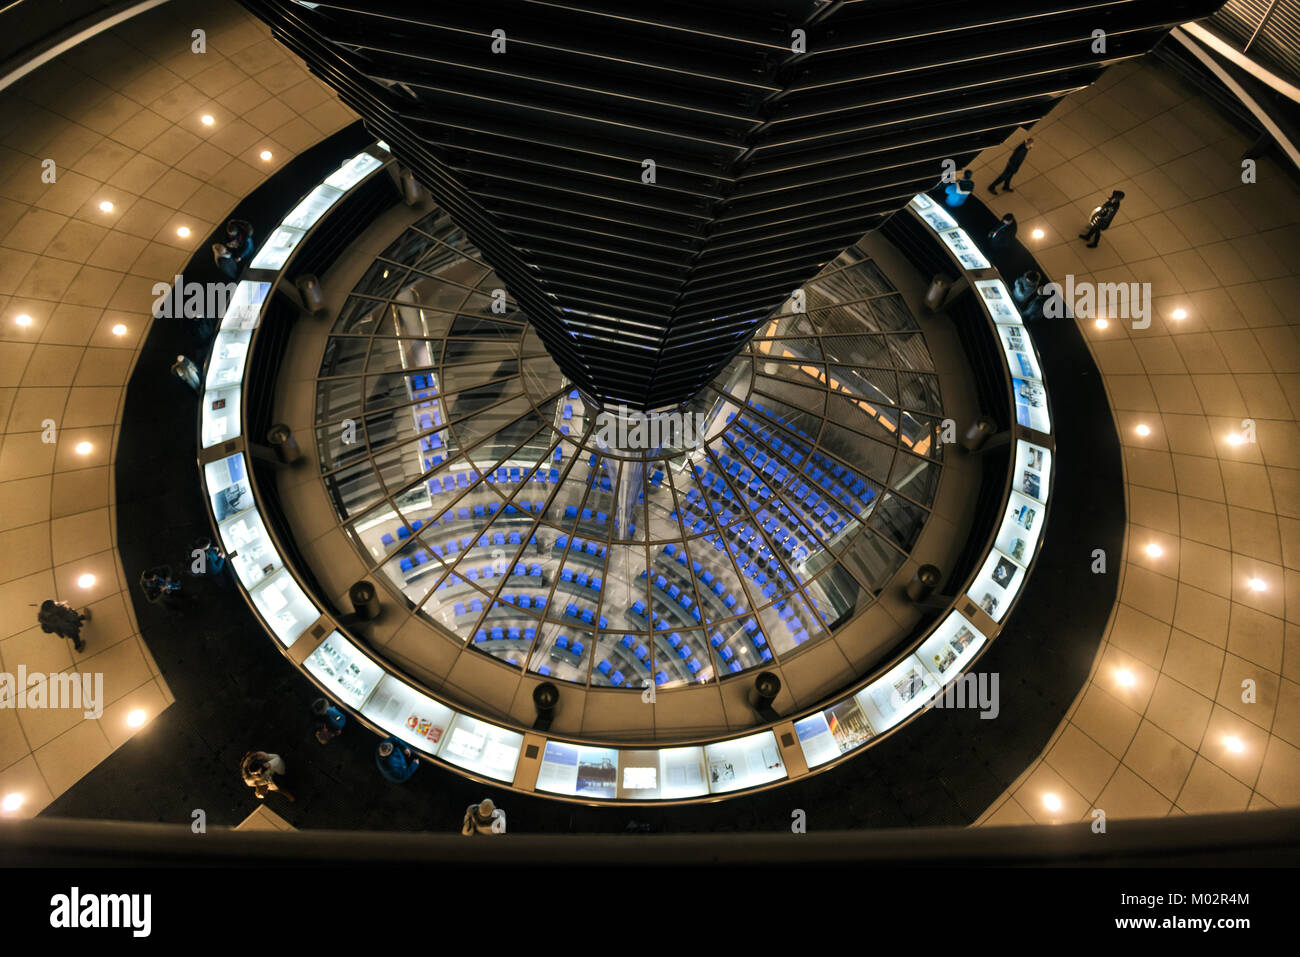 December 15. 2017 BERLIN: Inside the cupola of the Reichstag building in Berlin at night. Stock Photo